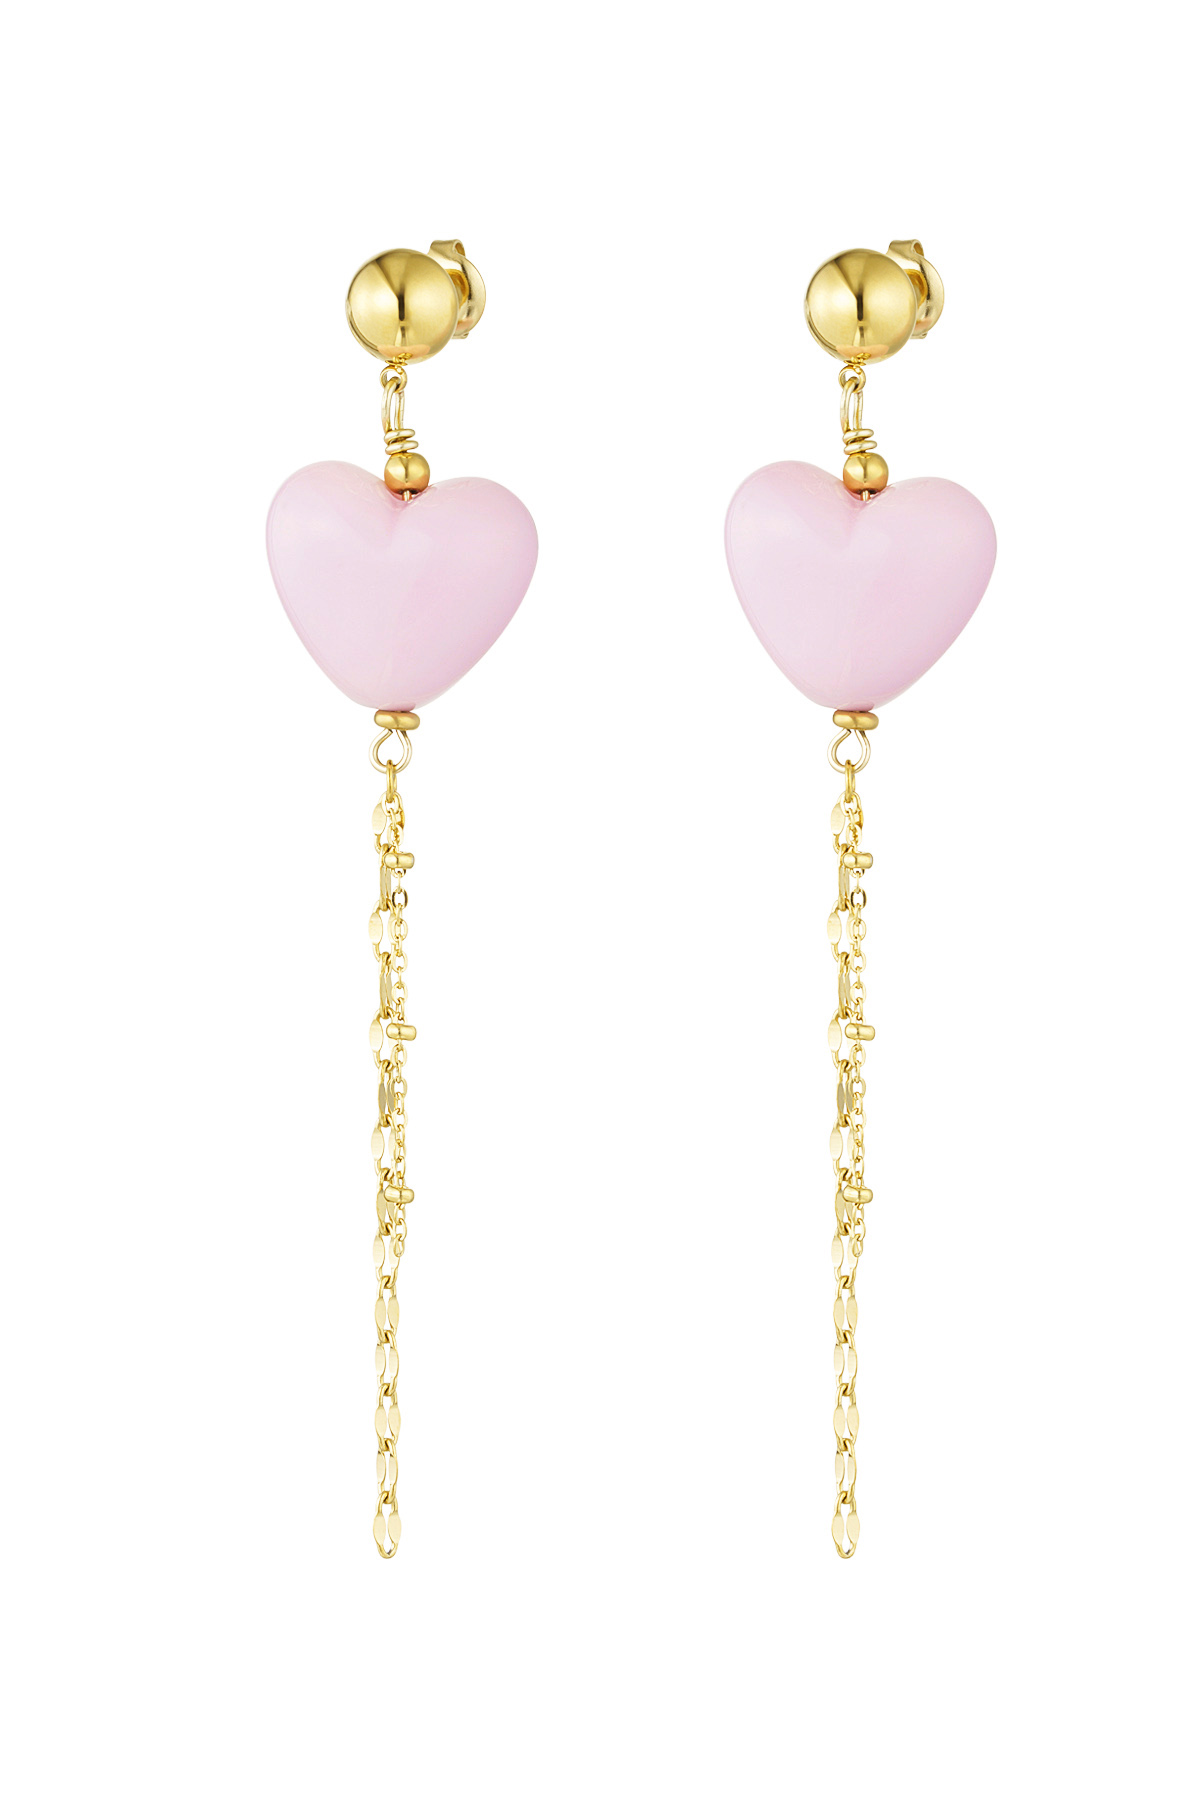 Earrings no strings attached - pink gold